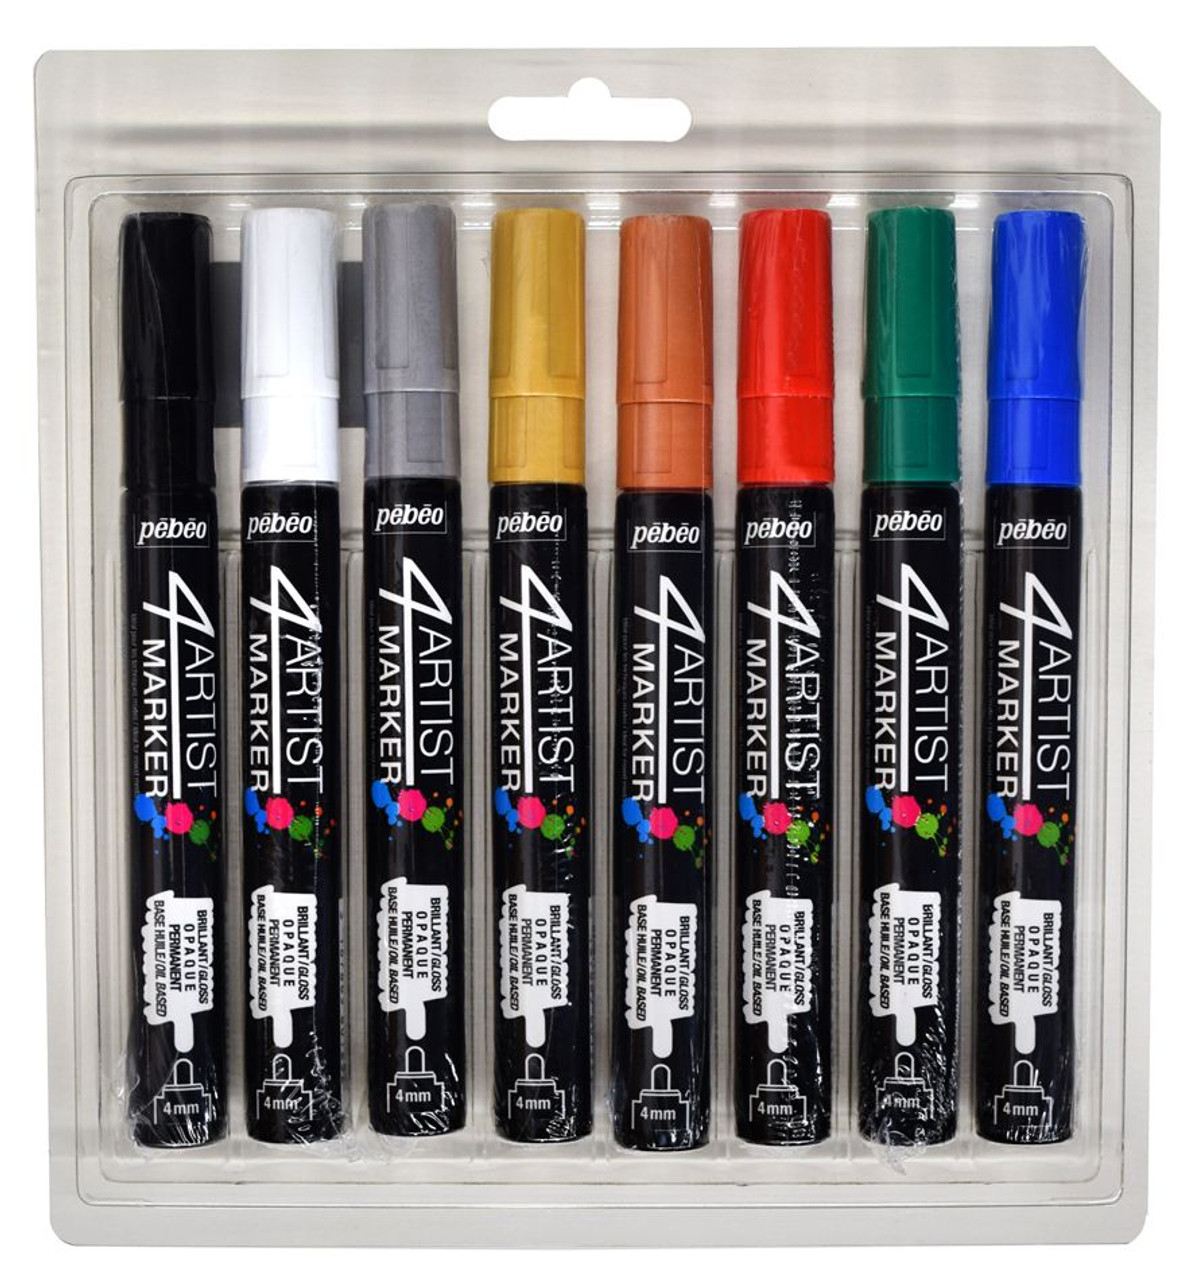 Pebeo Latex-Free Drawing Gum 4mm Marker